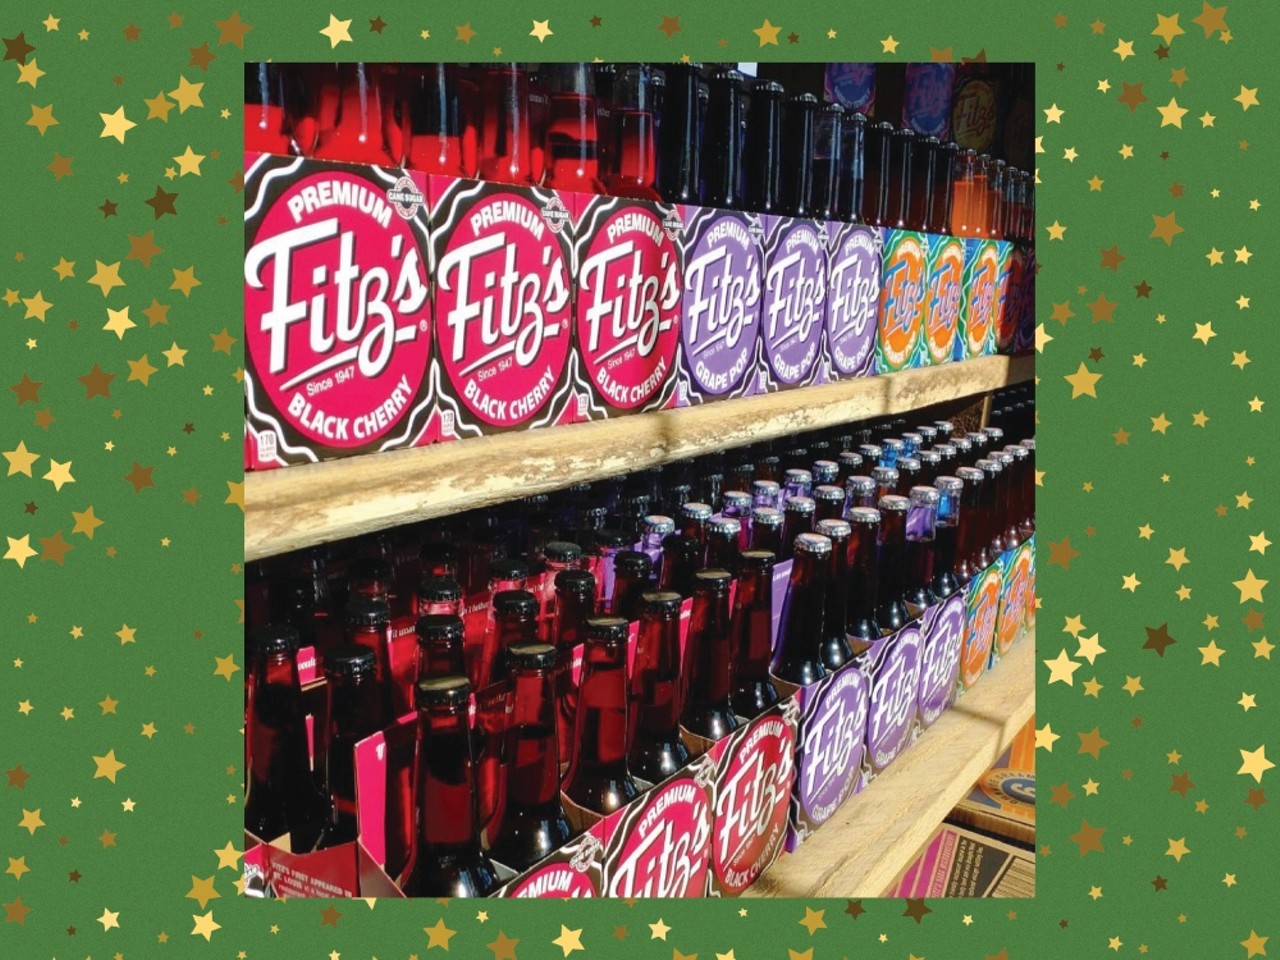 Two Four Packs of Handpicked Fitz&#146;s Sodas : $8
(two locations, including 6605 Delmar Boulevard)
Think you know your giftee? How about testing your knowledge with a handpicked four pack of Fitz&#146;s Sodas? Whether they&#146;re a classic root beer fan or like to explore with their taste buds, Fitz&#146;s handpicked four packs are popular with locals and tourists &#151; and you get two packs for $8.
Photo credit: Fitz's Root Beer